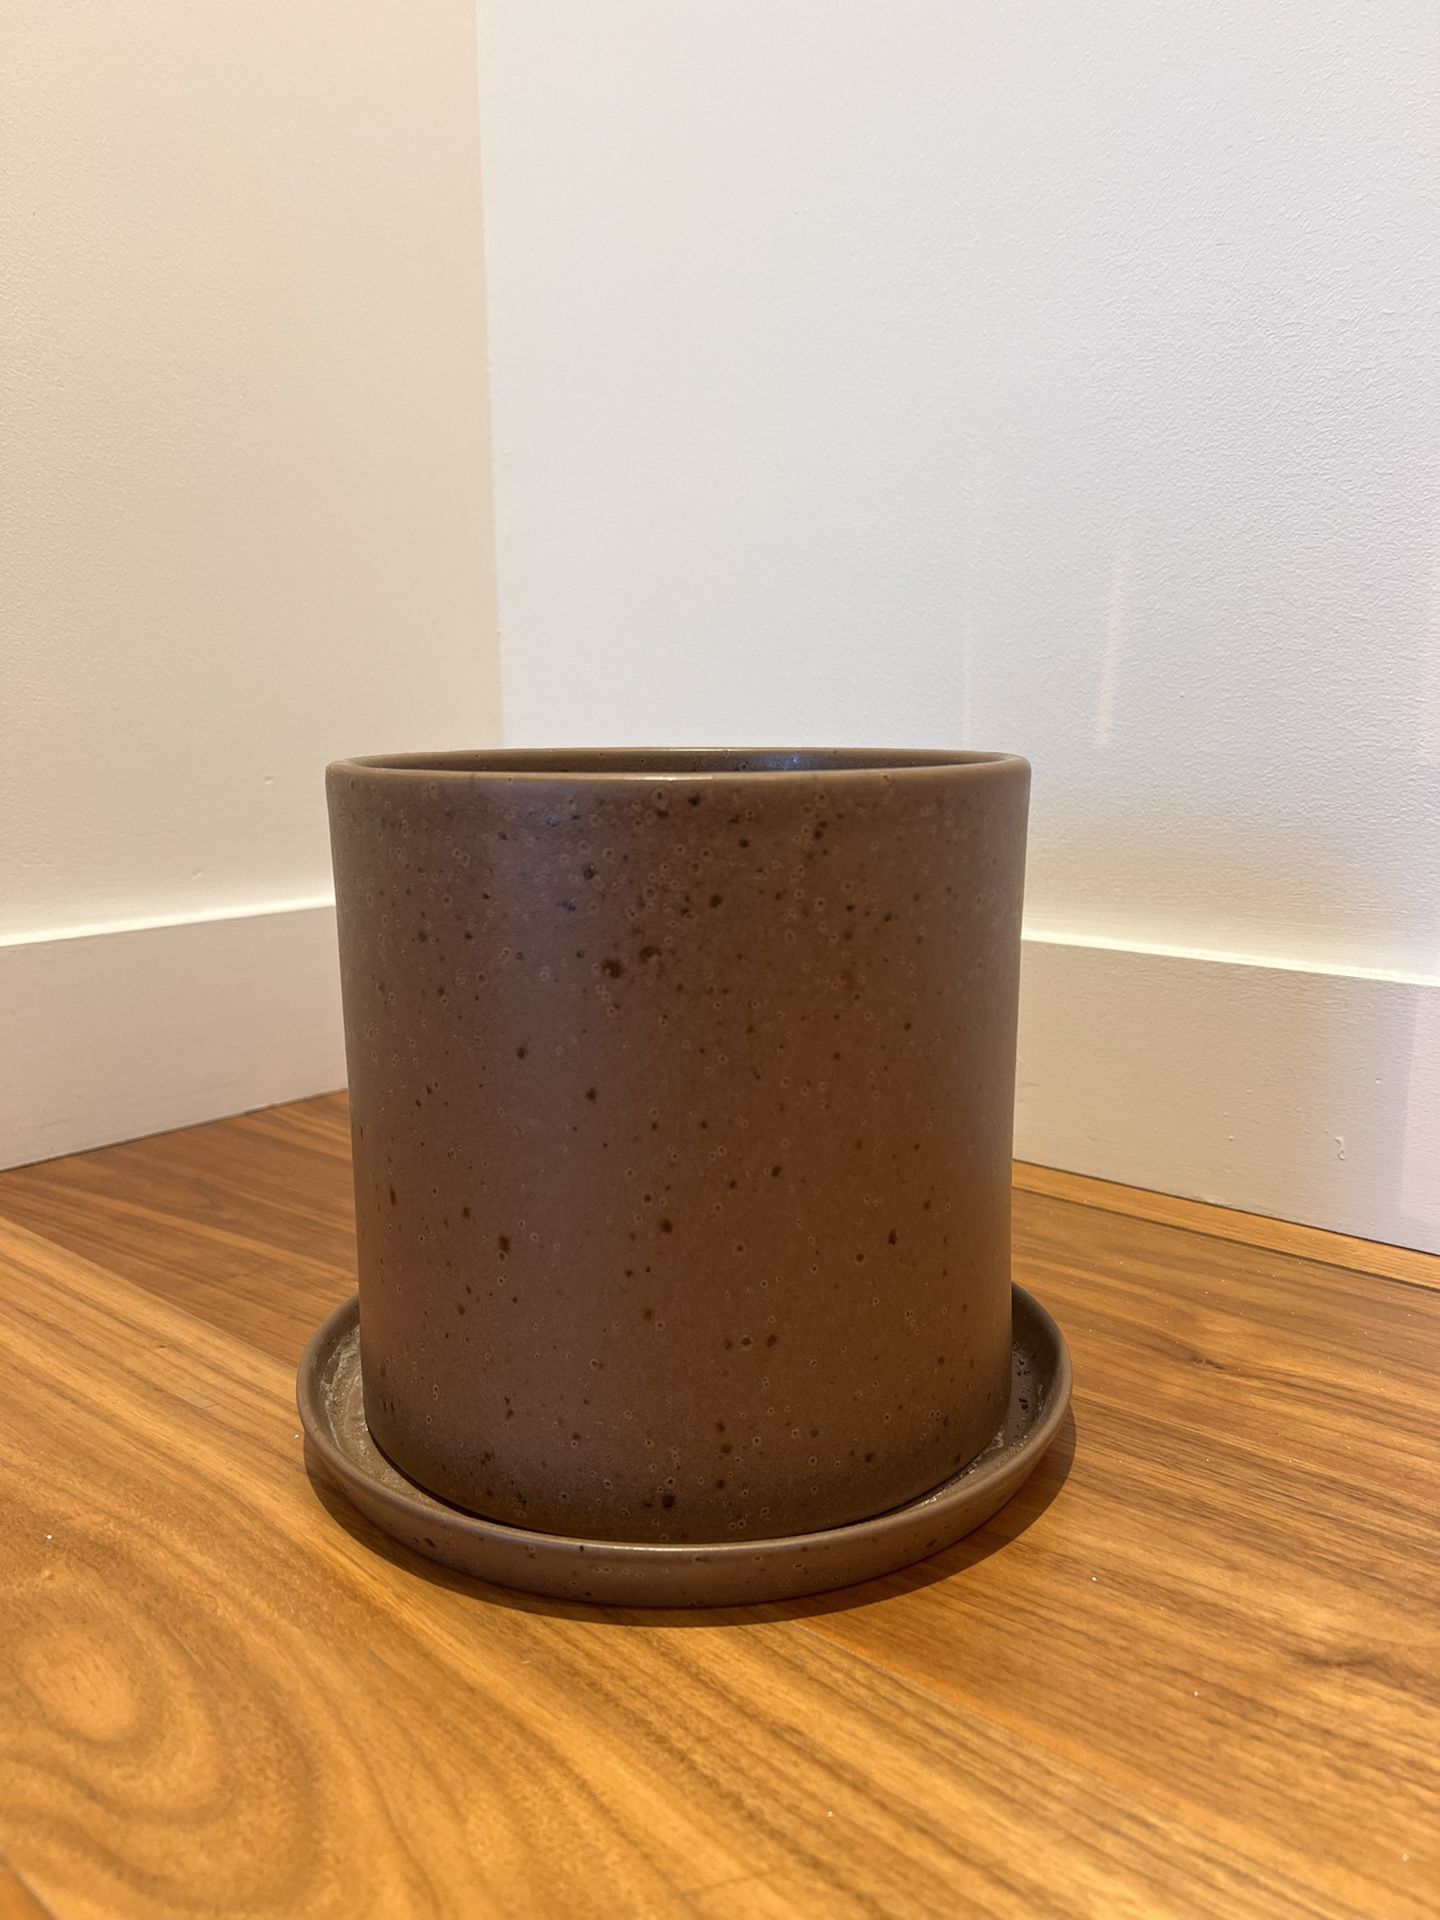 Flower Pot with tray